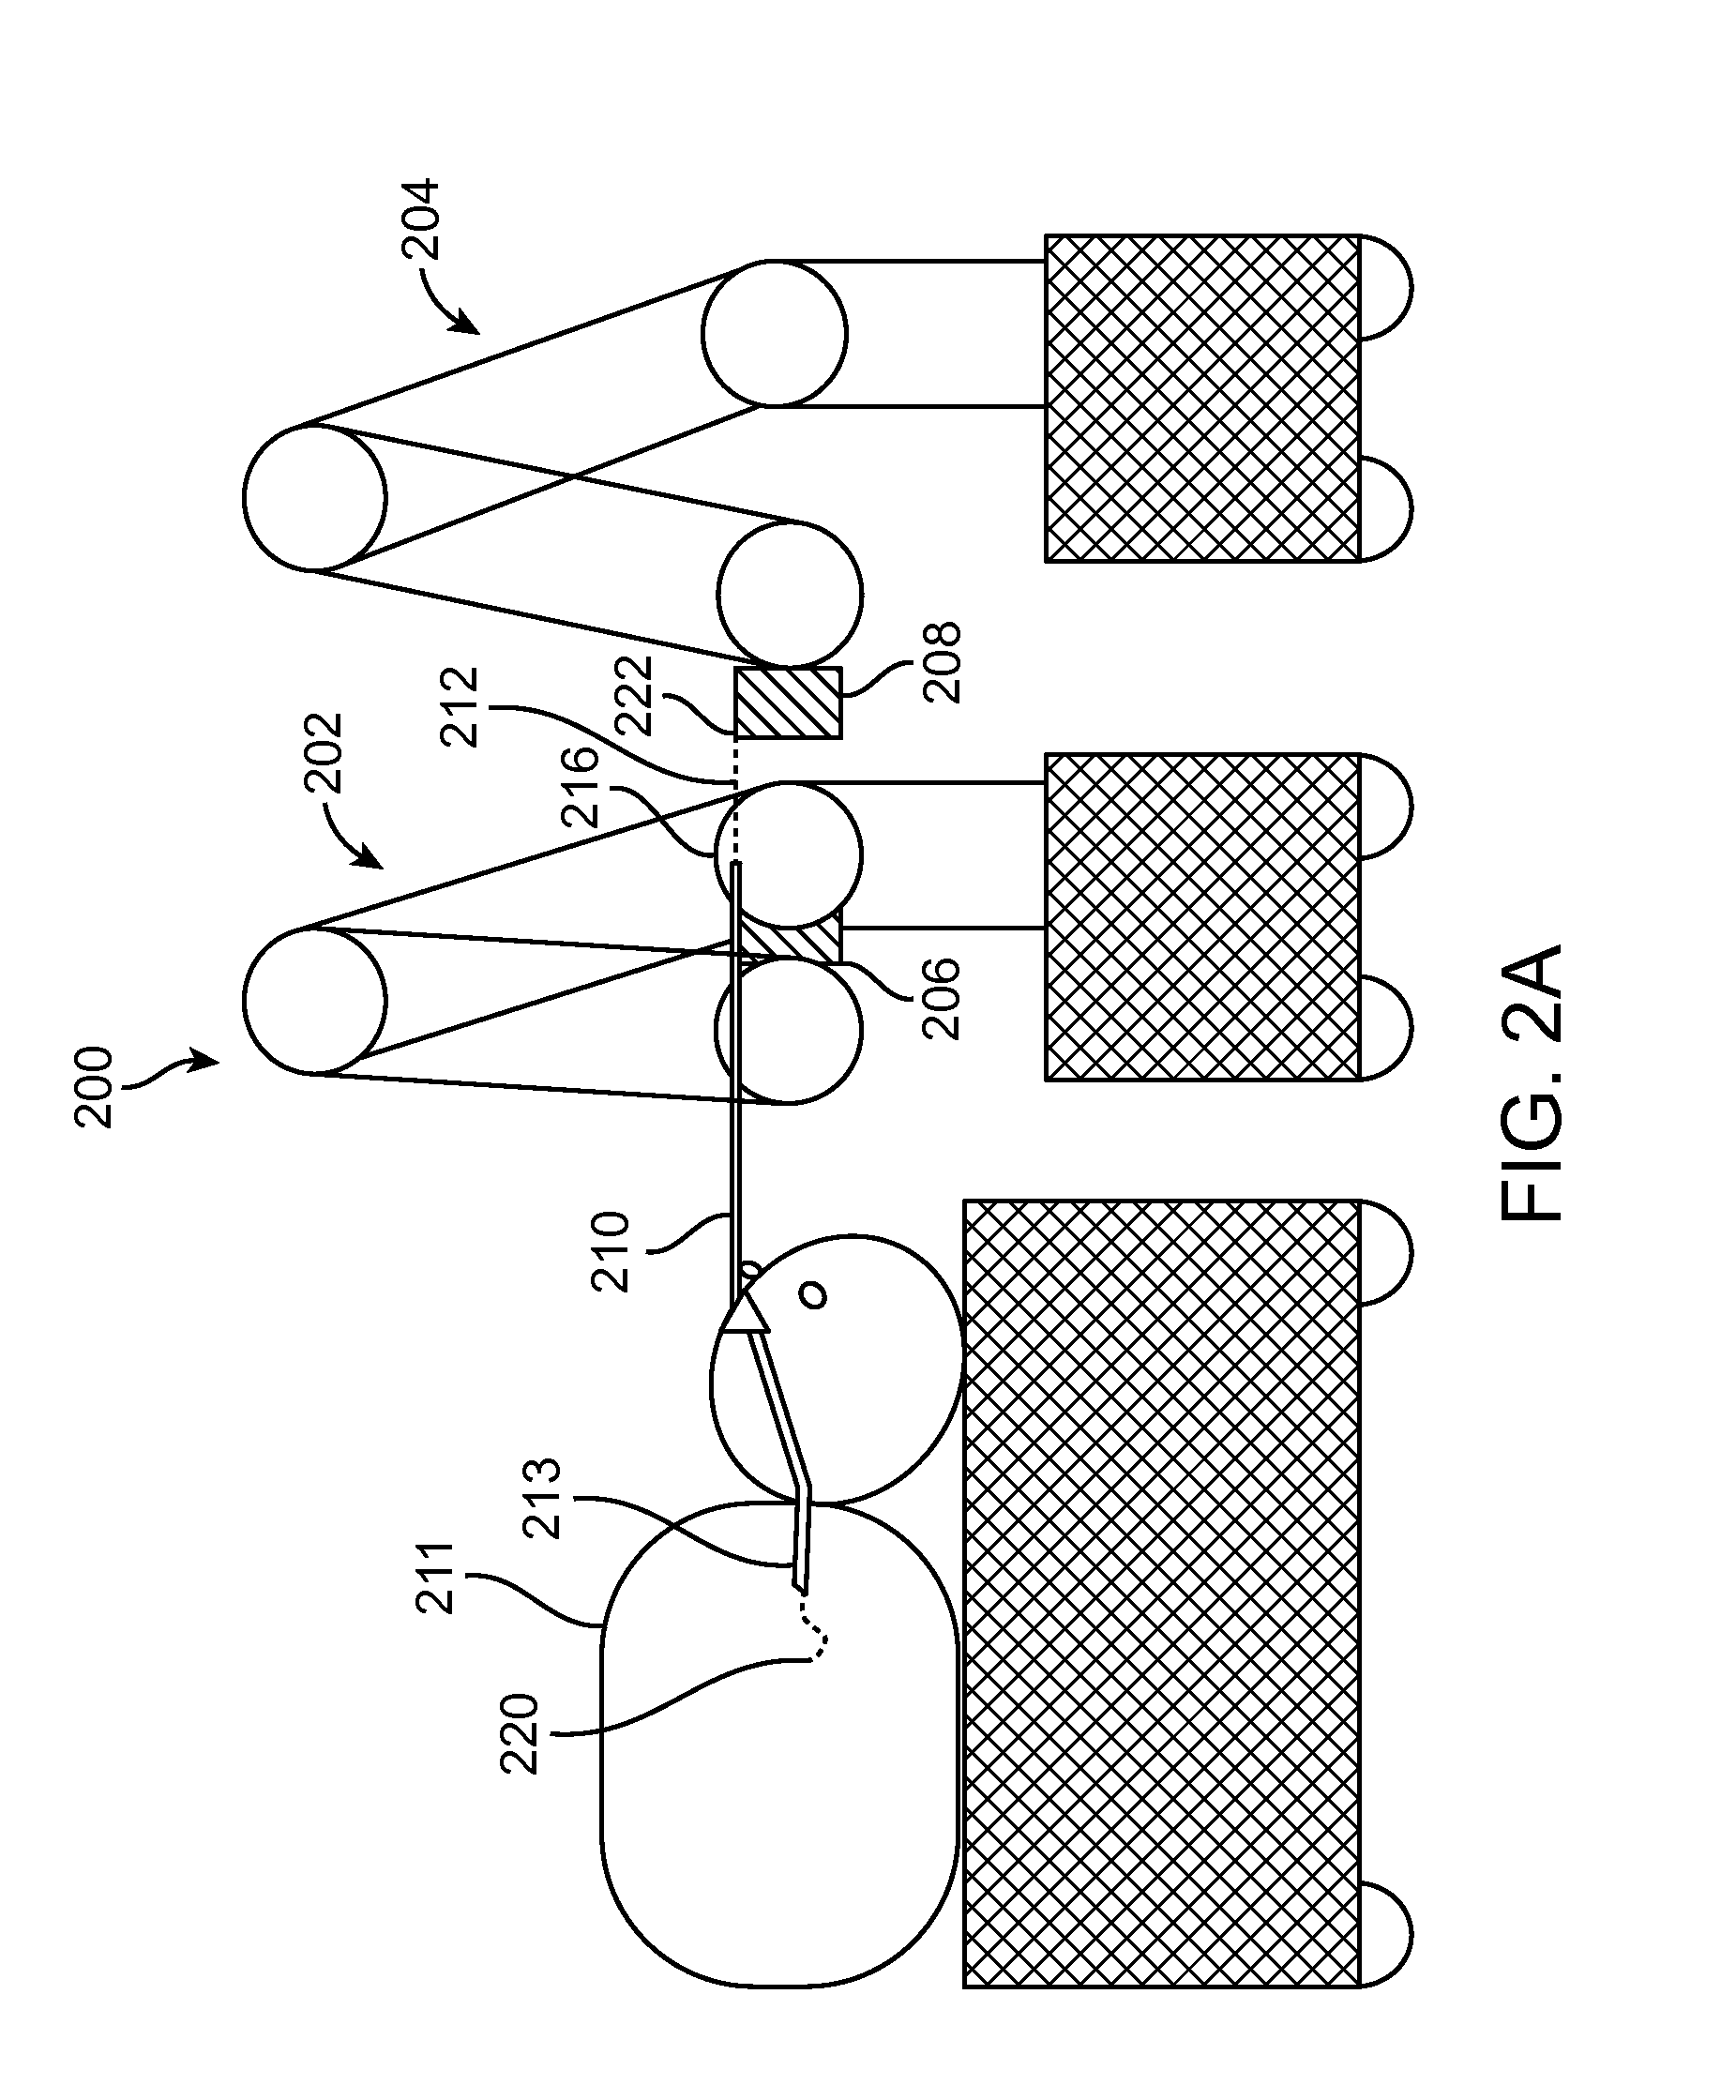 System for robotic-assisted endolumenal surgery and related methods